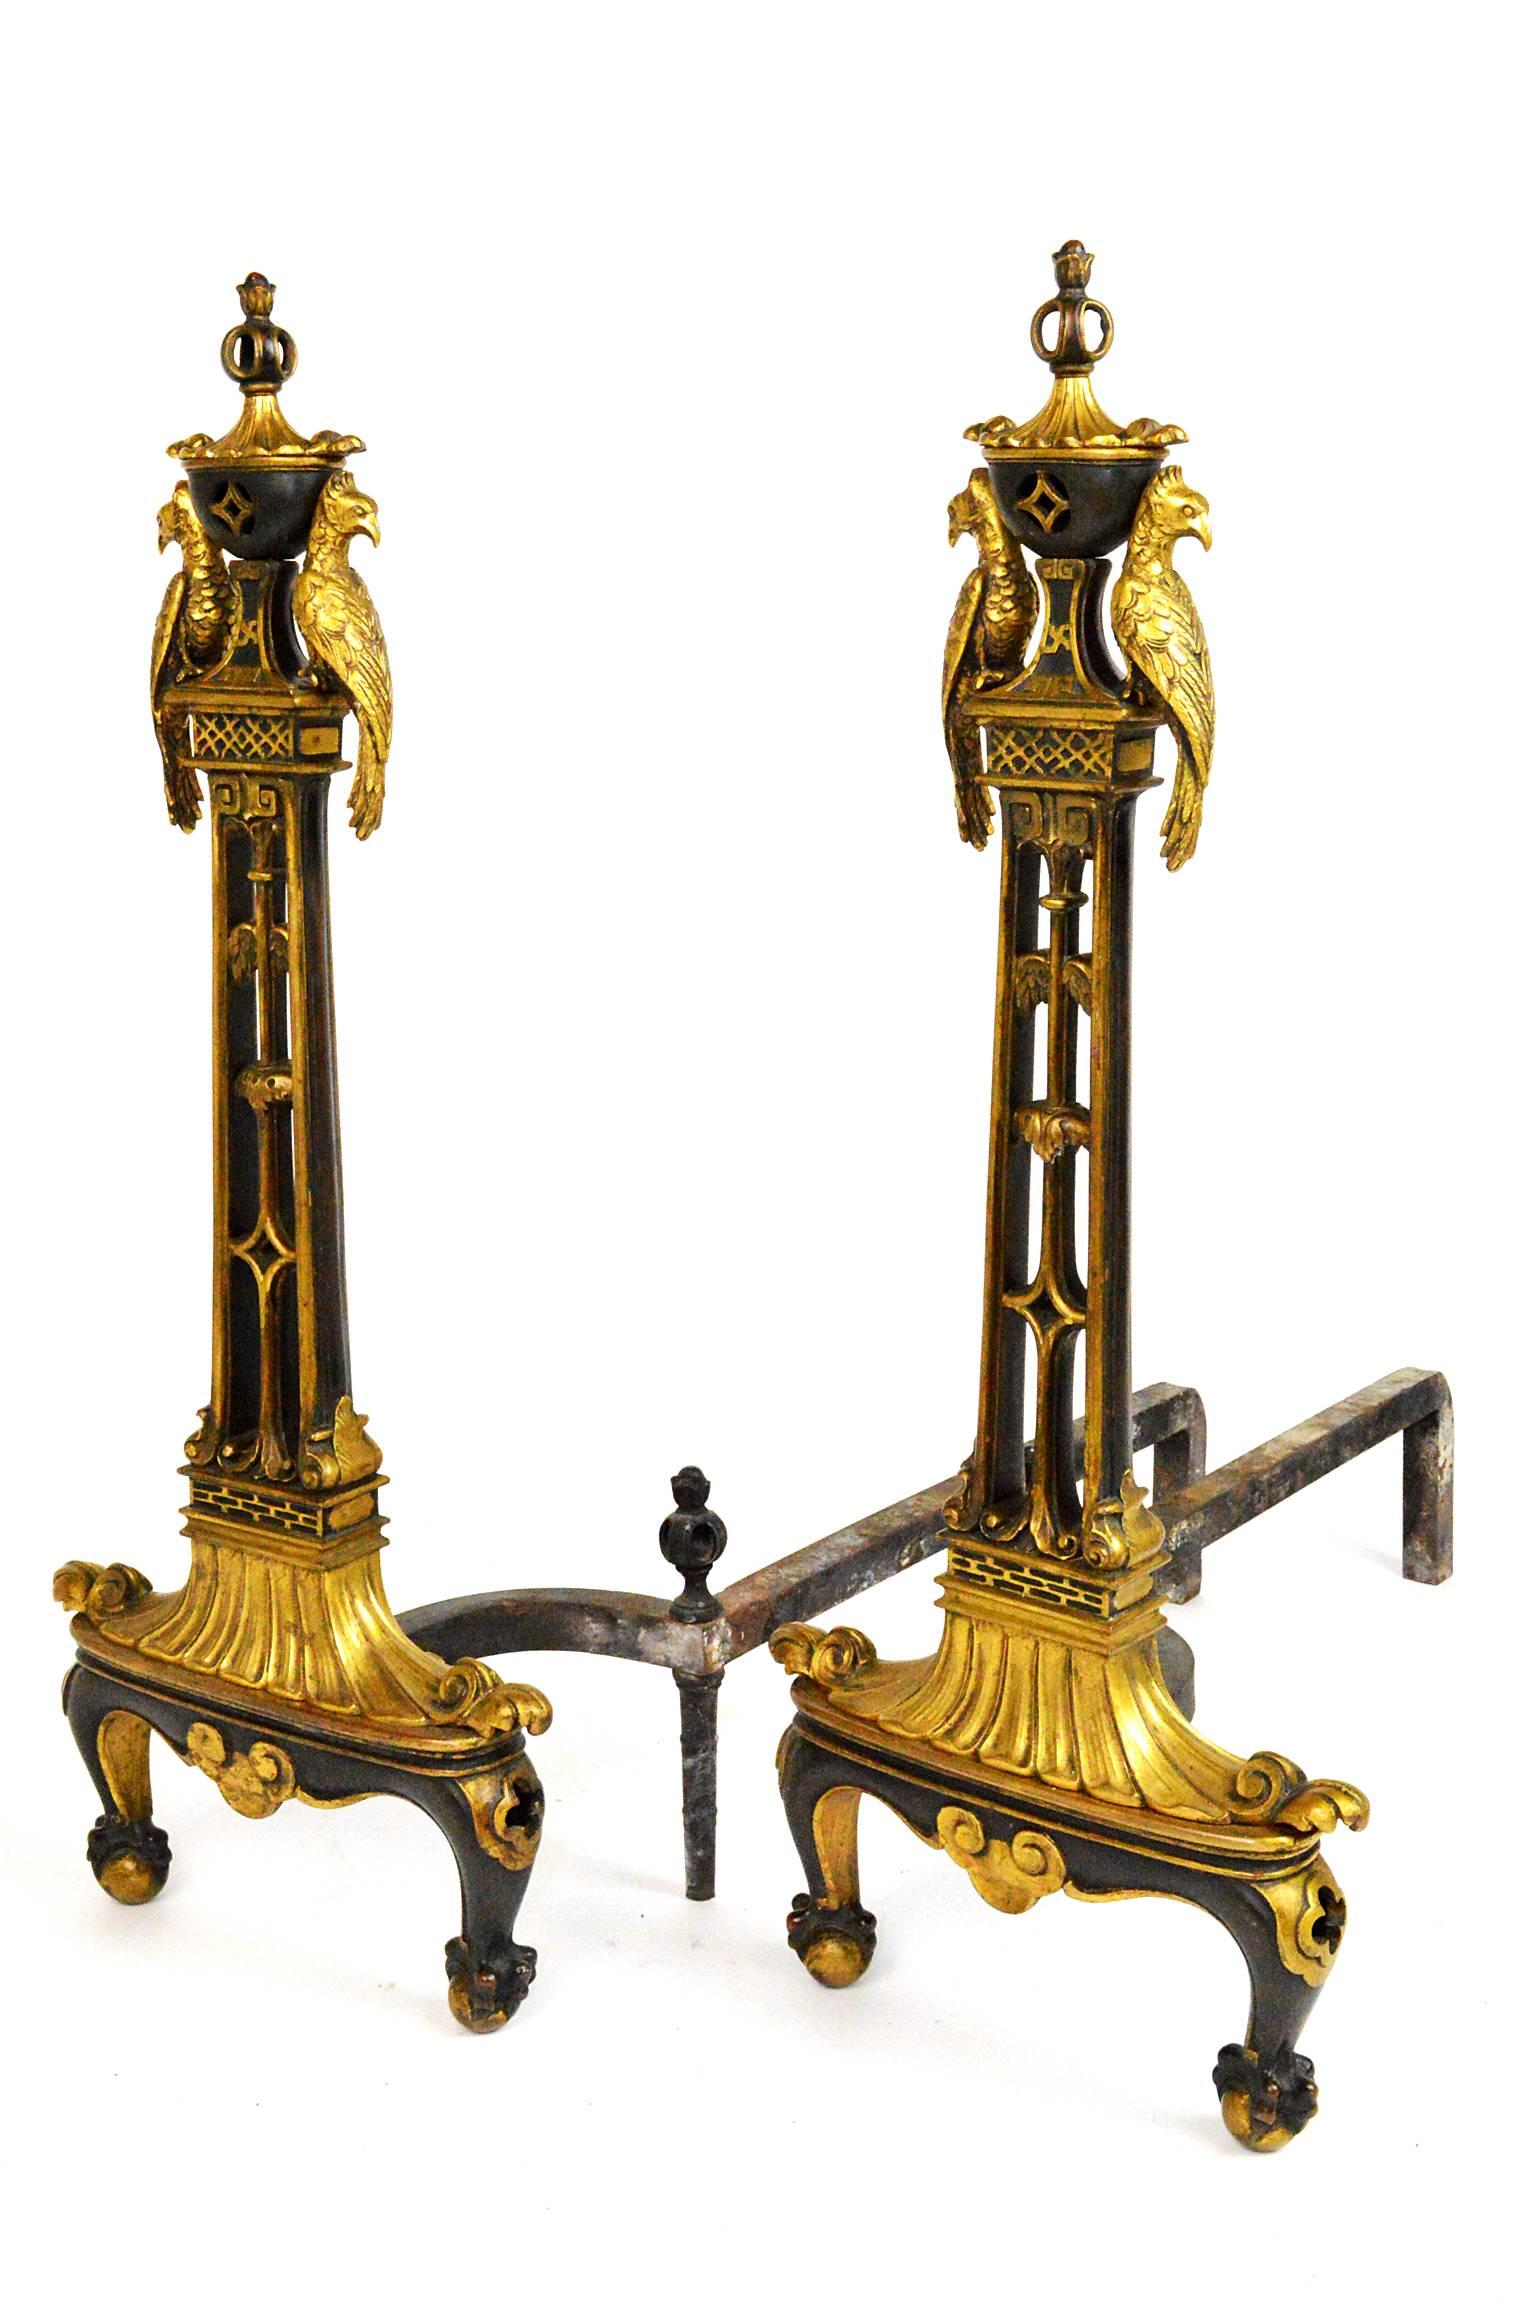 Pair of Chinese Chippendale style gilt and patinated bronze andirons. Featuring figural exotic birds, reticulated uprights and ending in ball-and-claw feet. Likely E F Caldwell New York.